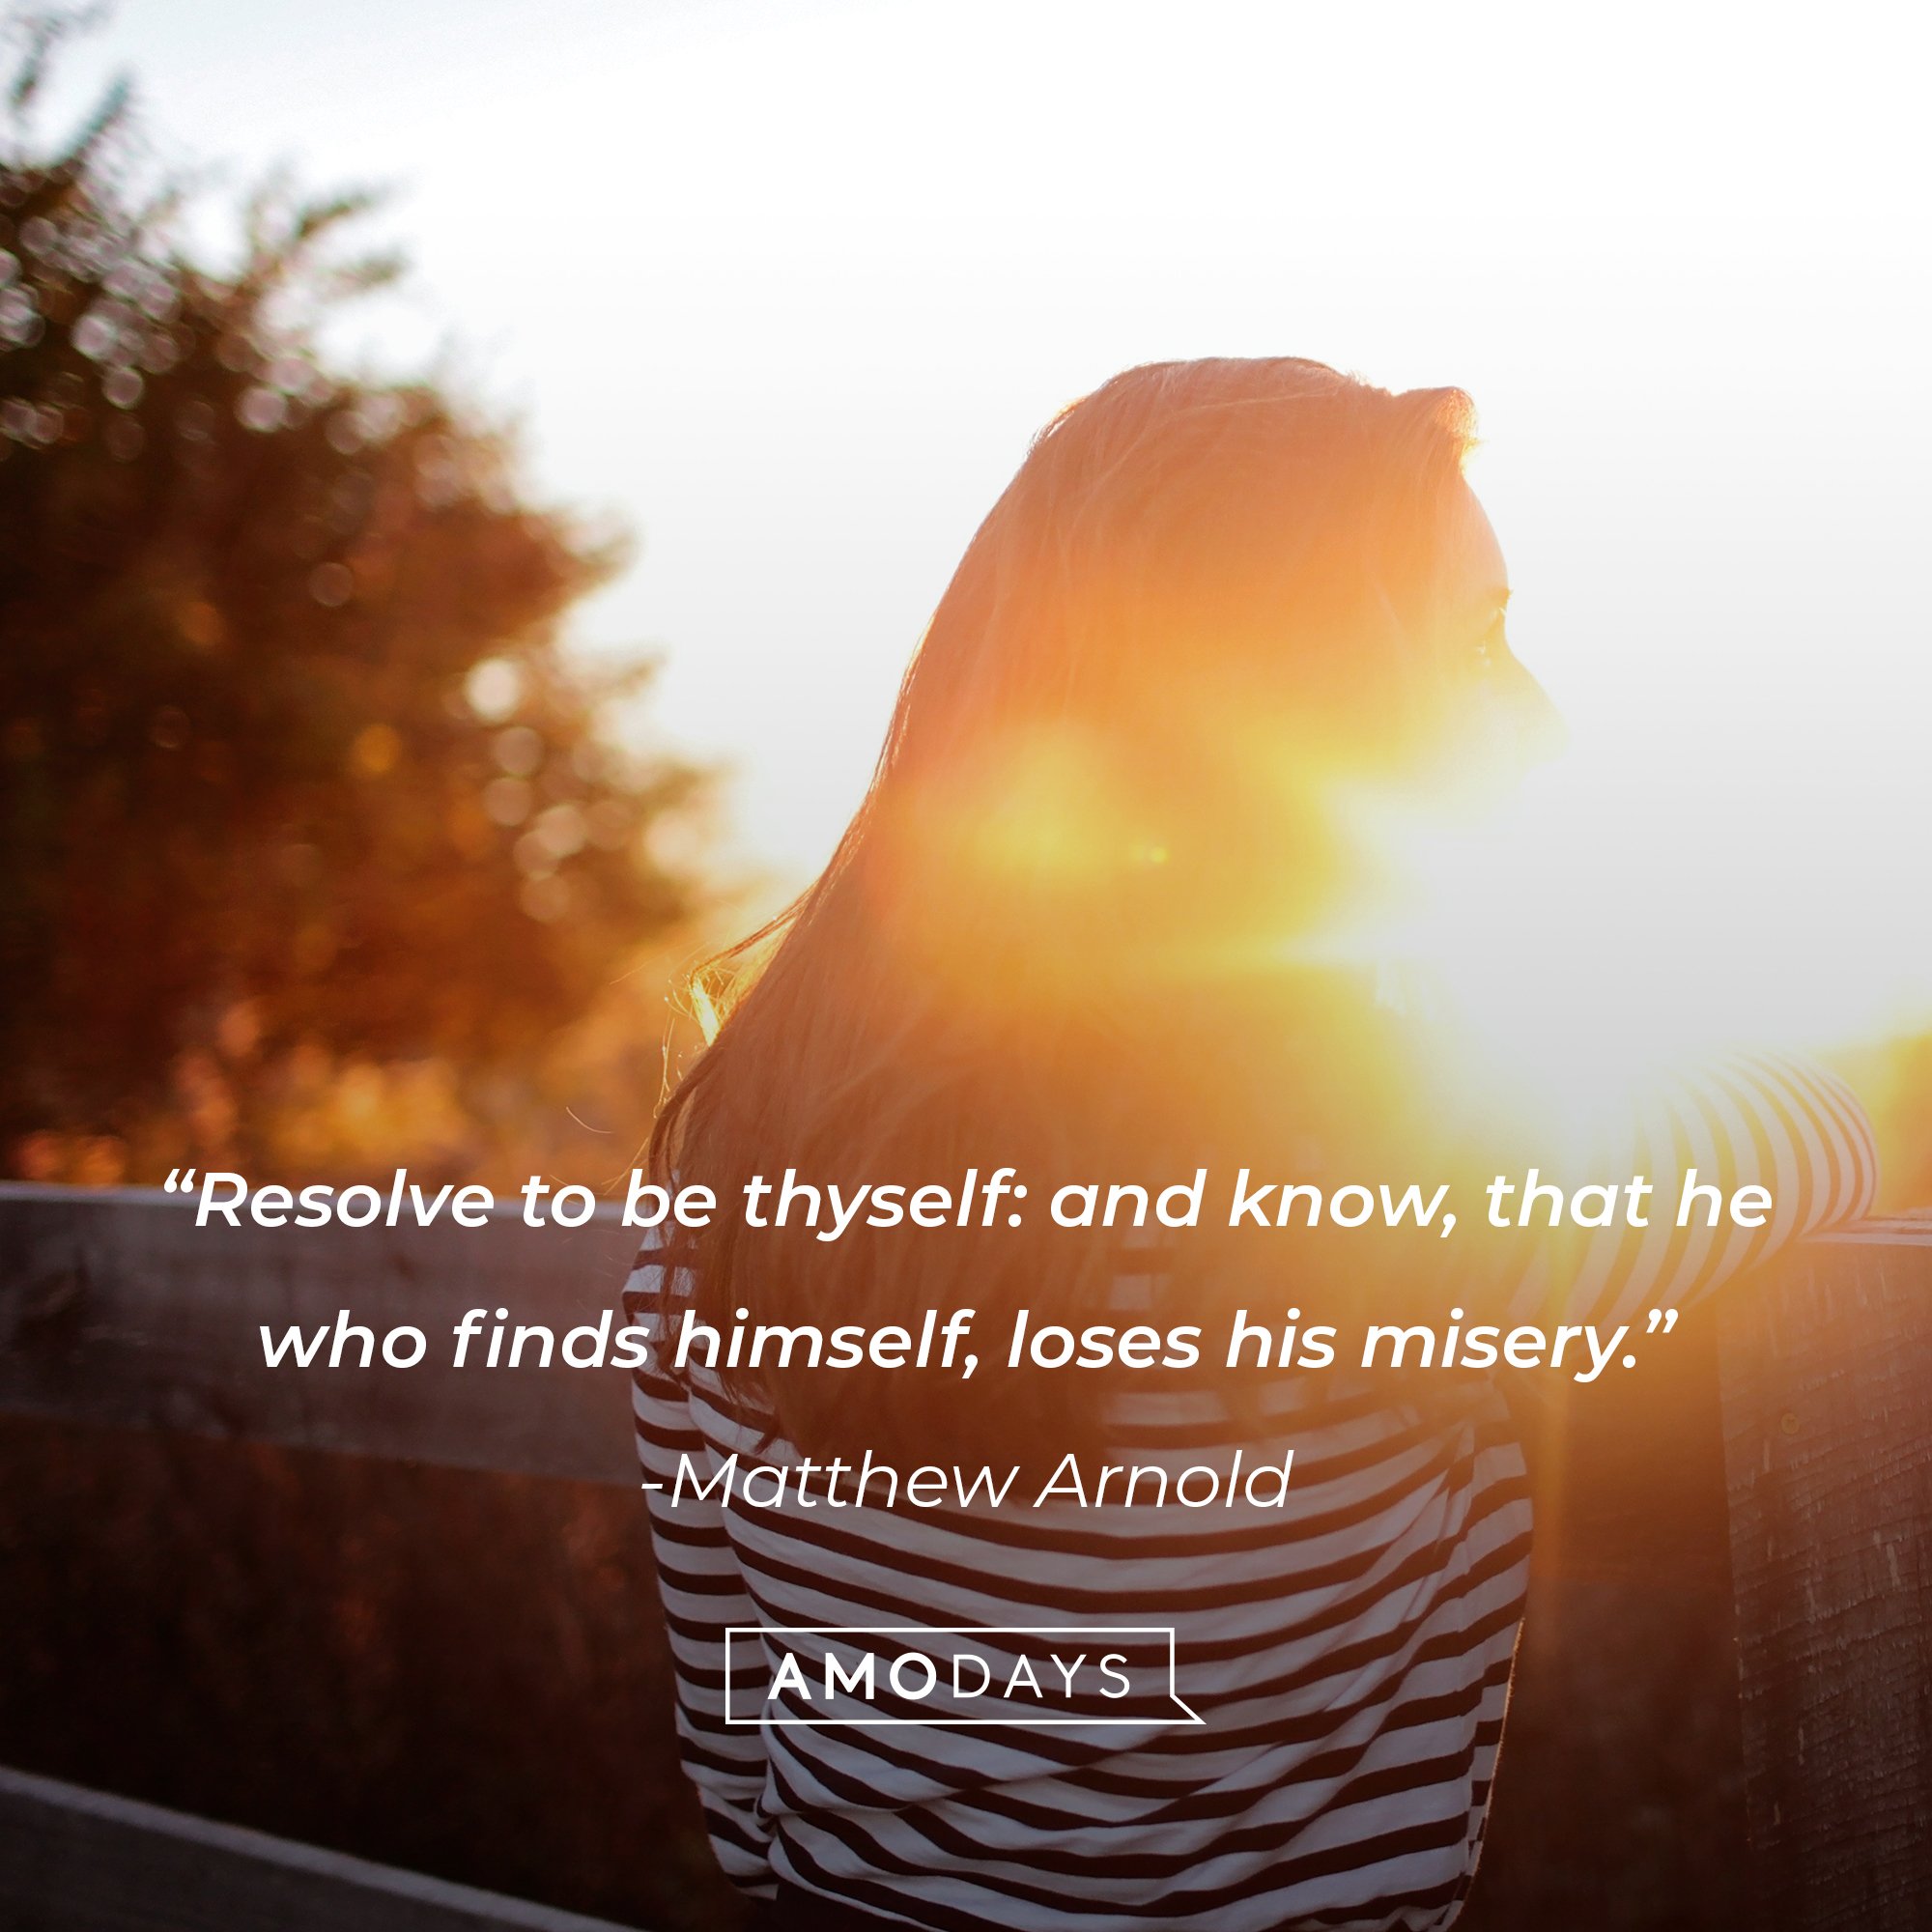  Matthew Arnold's quote: “Resolve to be thyself: and know, that he who finds himself, loses his misery.”  | Image: AmoDays